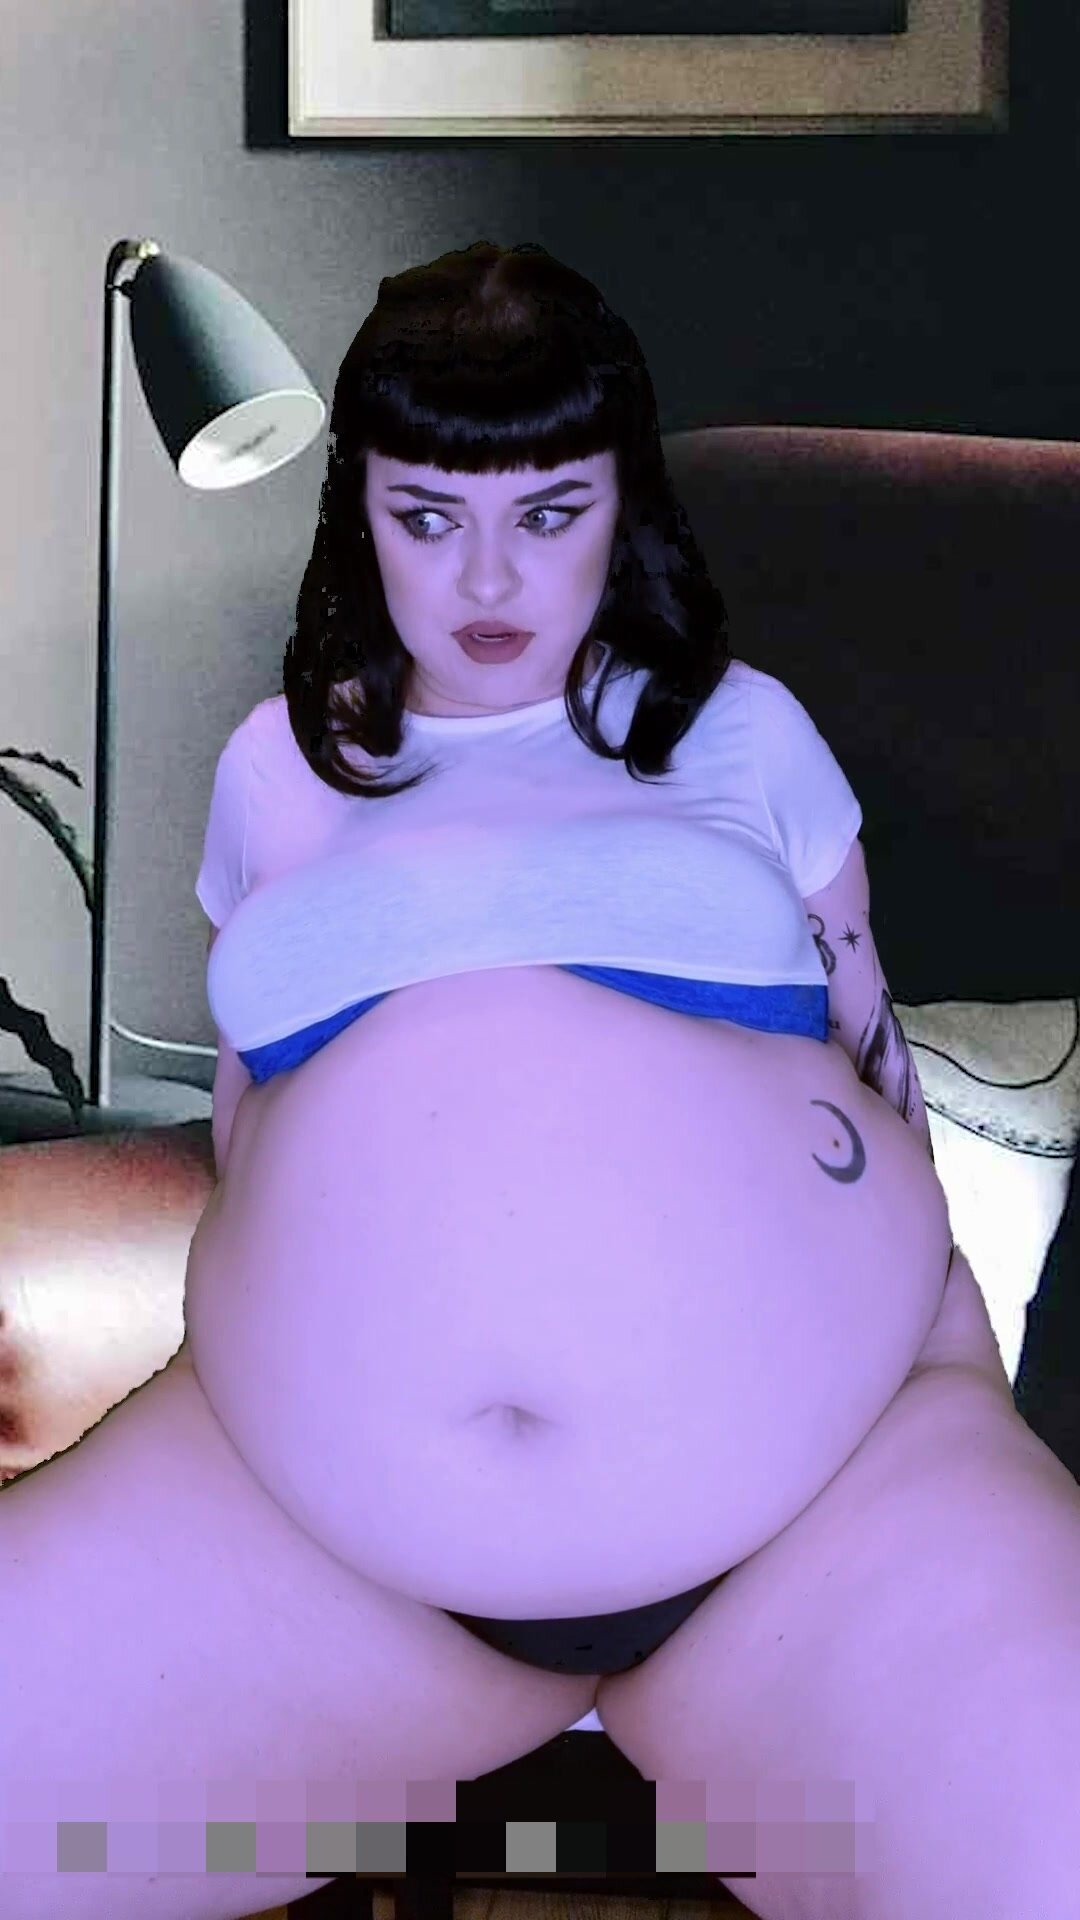 The purple ball girl is very bloated